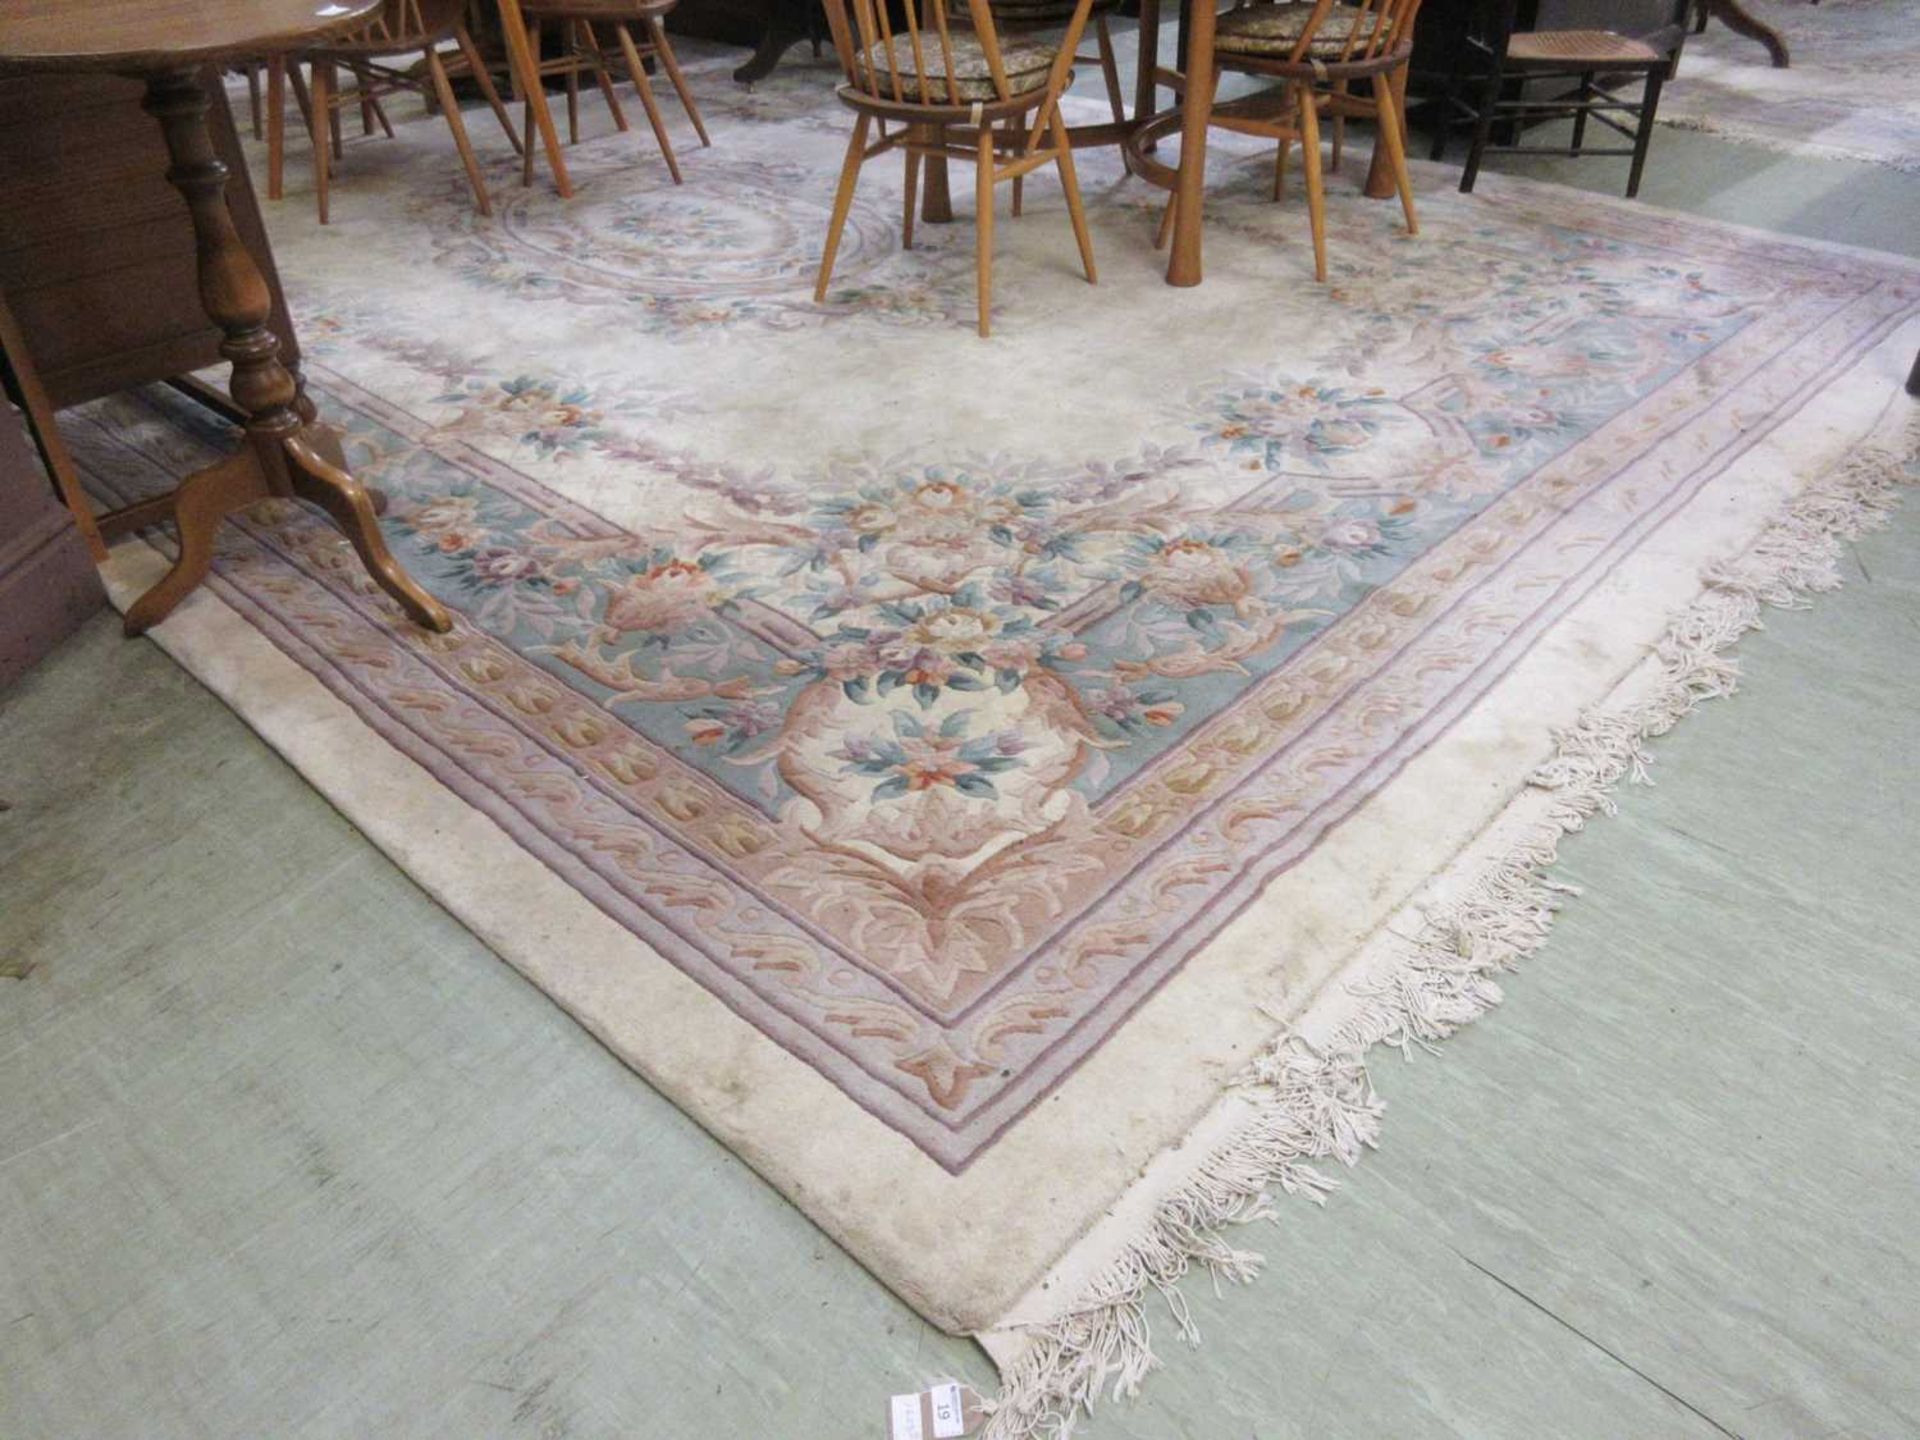 A large rectangular cream Chinese rug measuring 490cm by 322cm